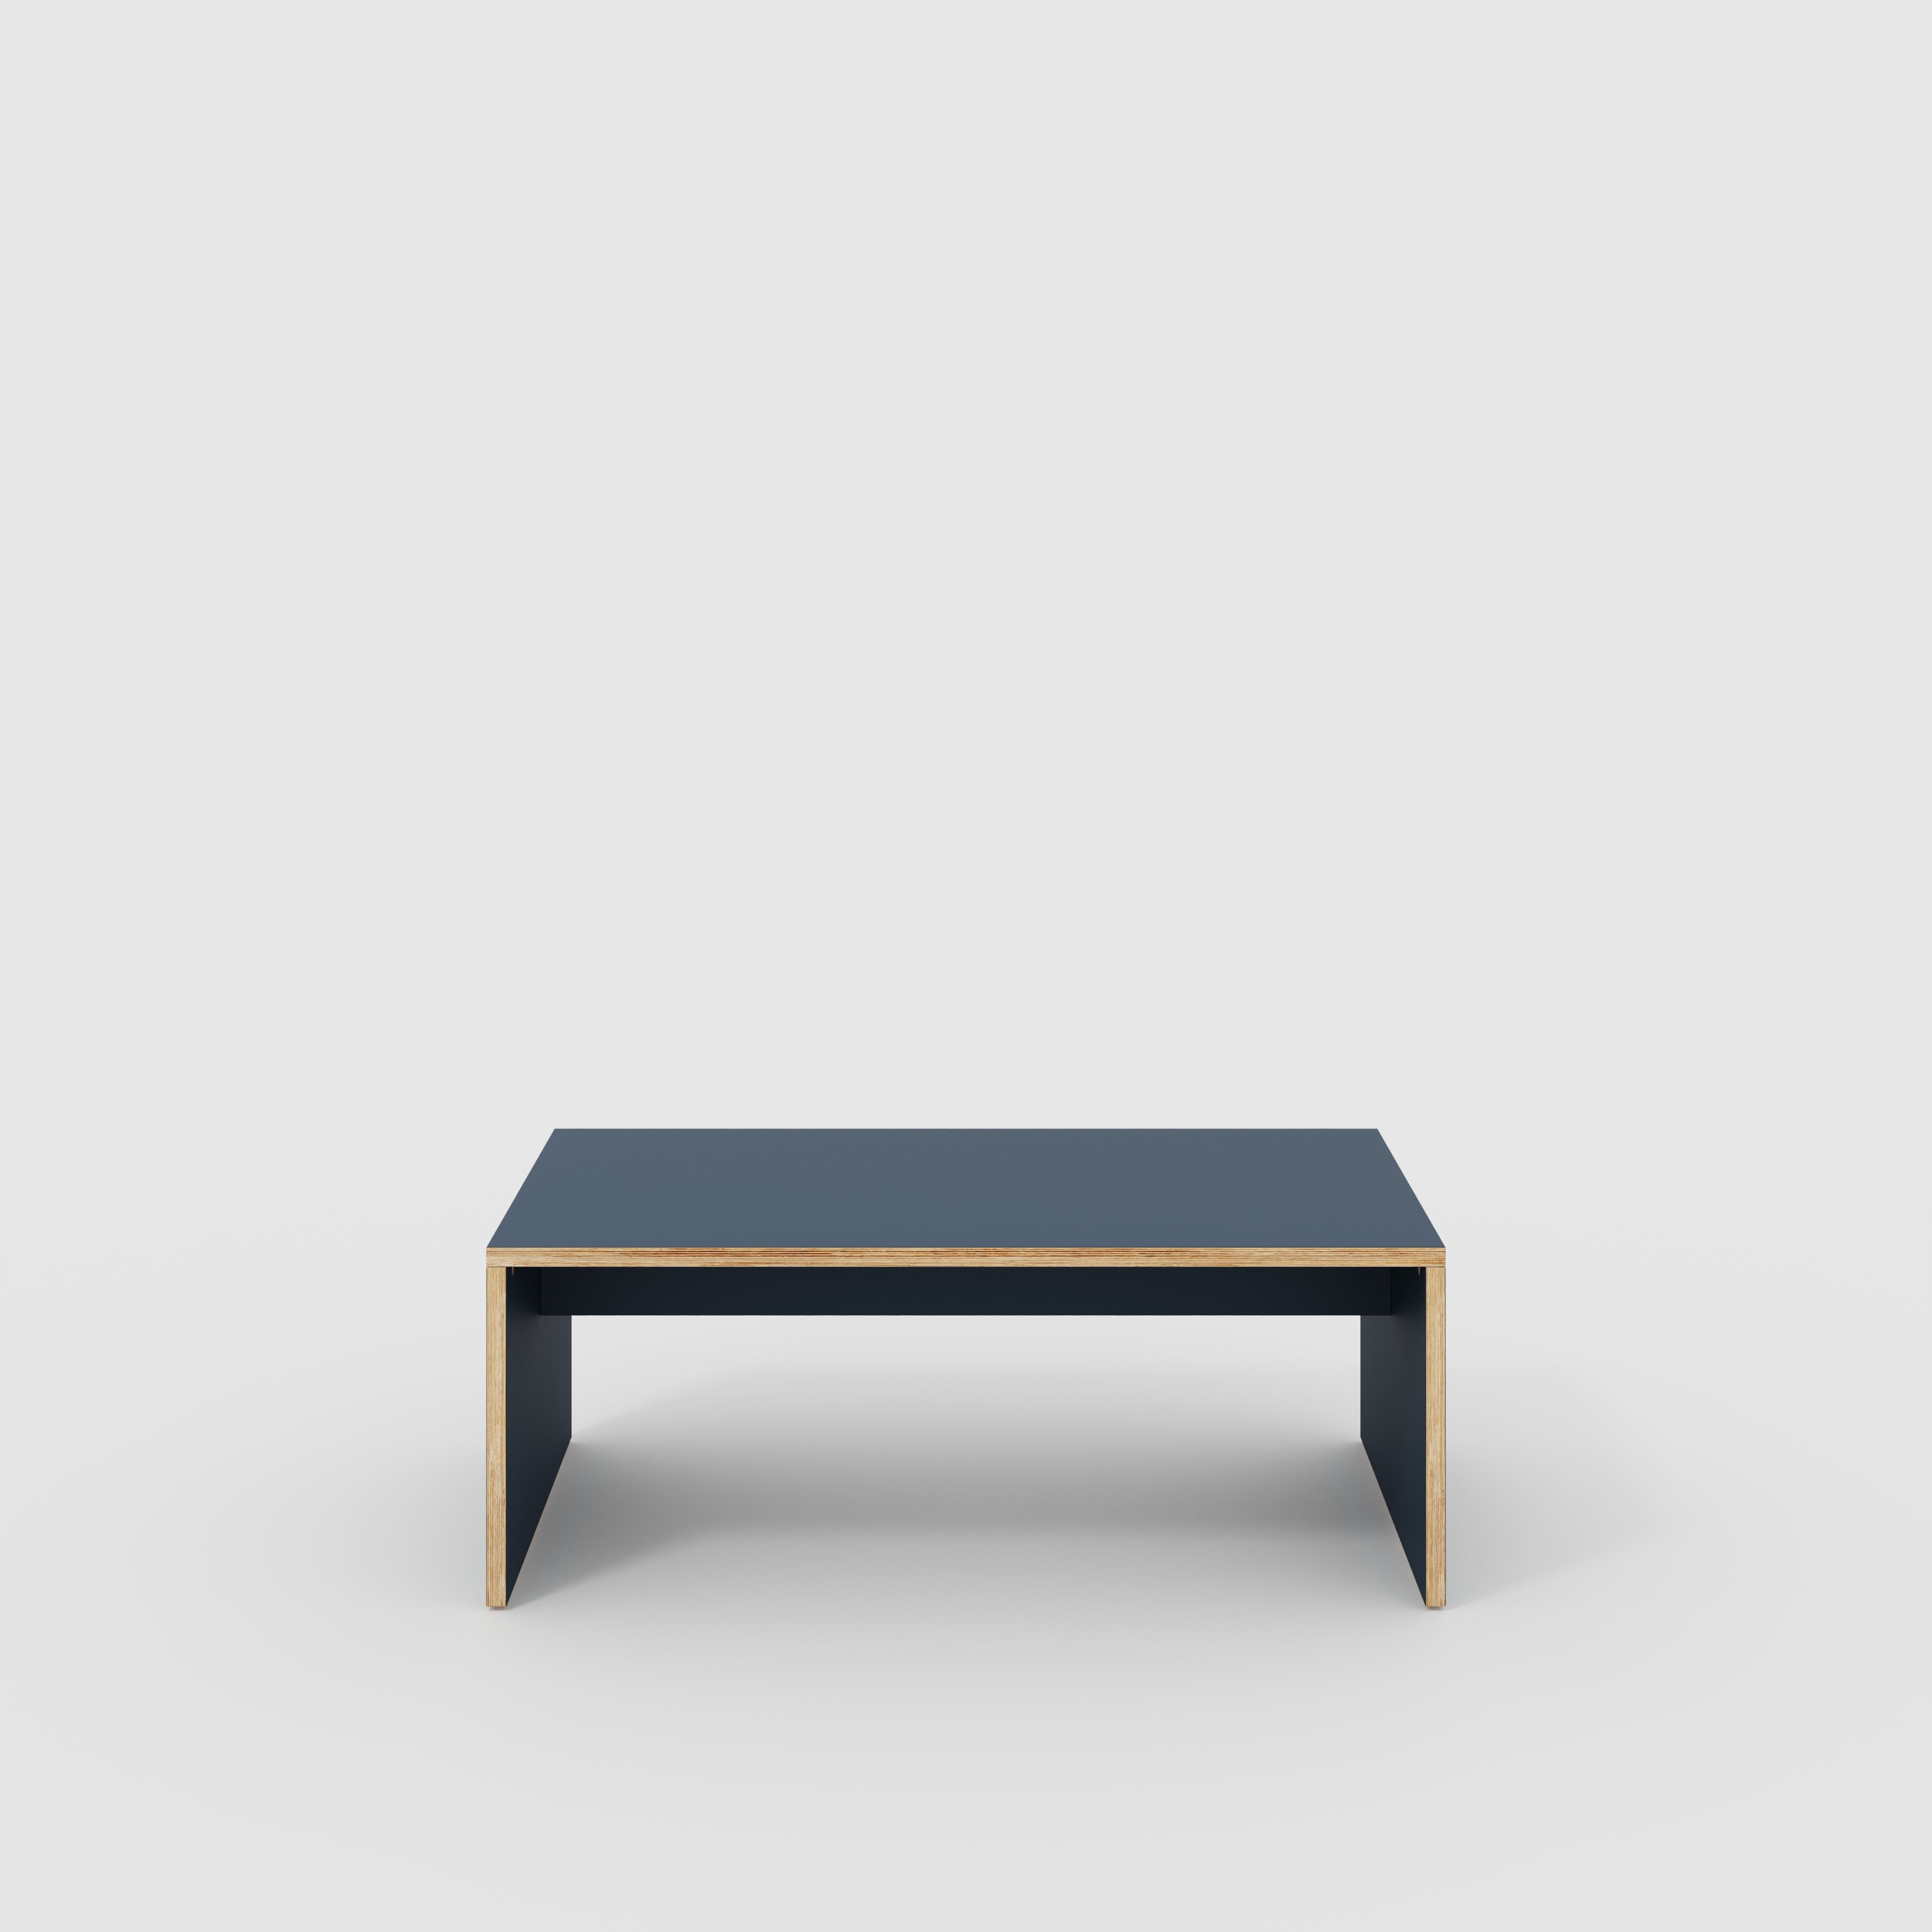 Coffee Table with Solid Sides - Formica Night Sea Blue - 1200(w) x 600(d) x 450(h)